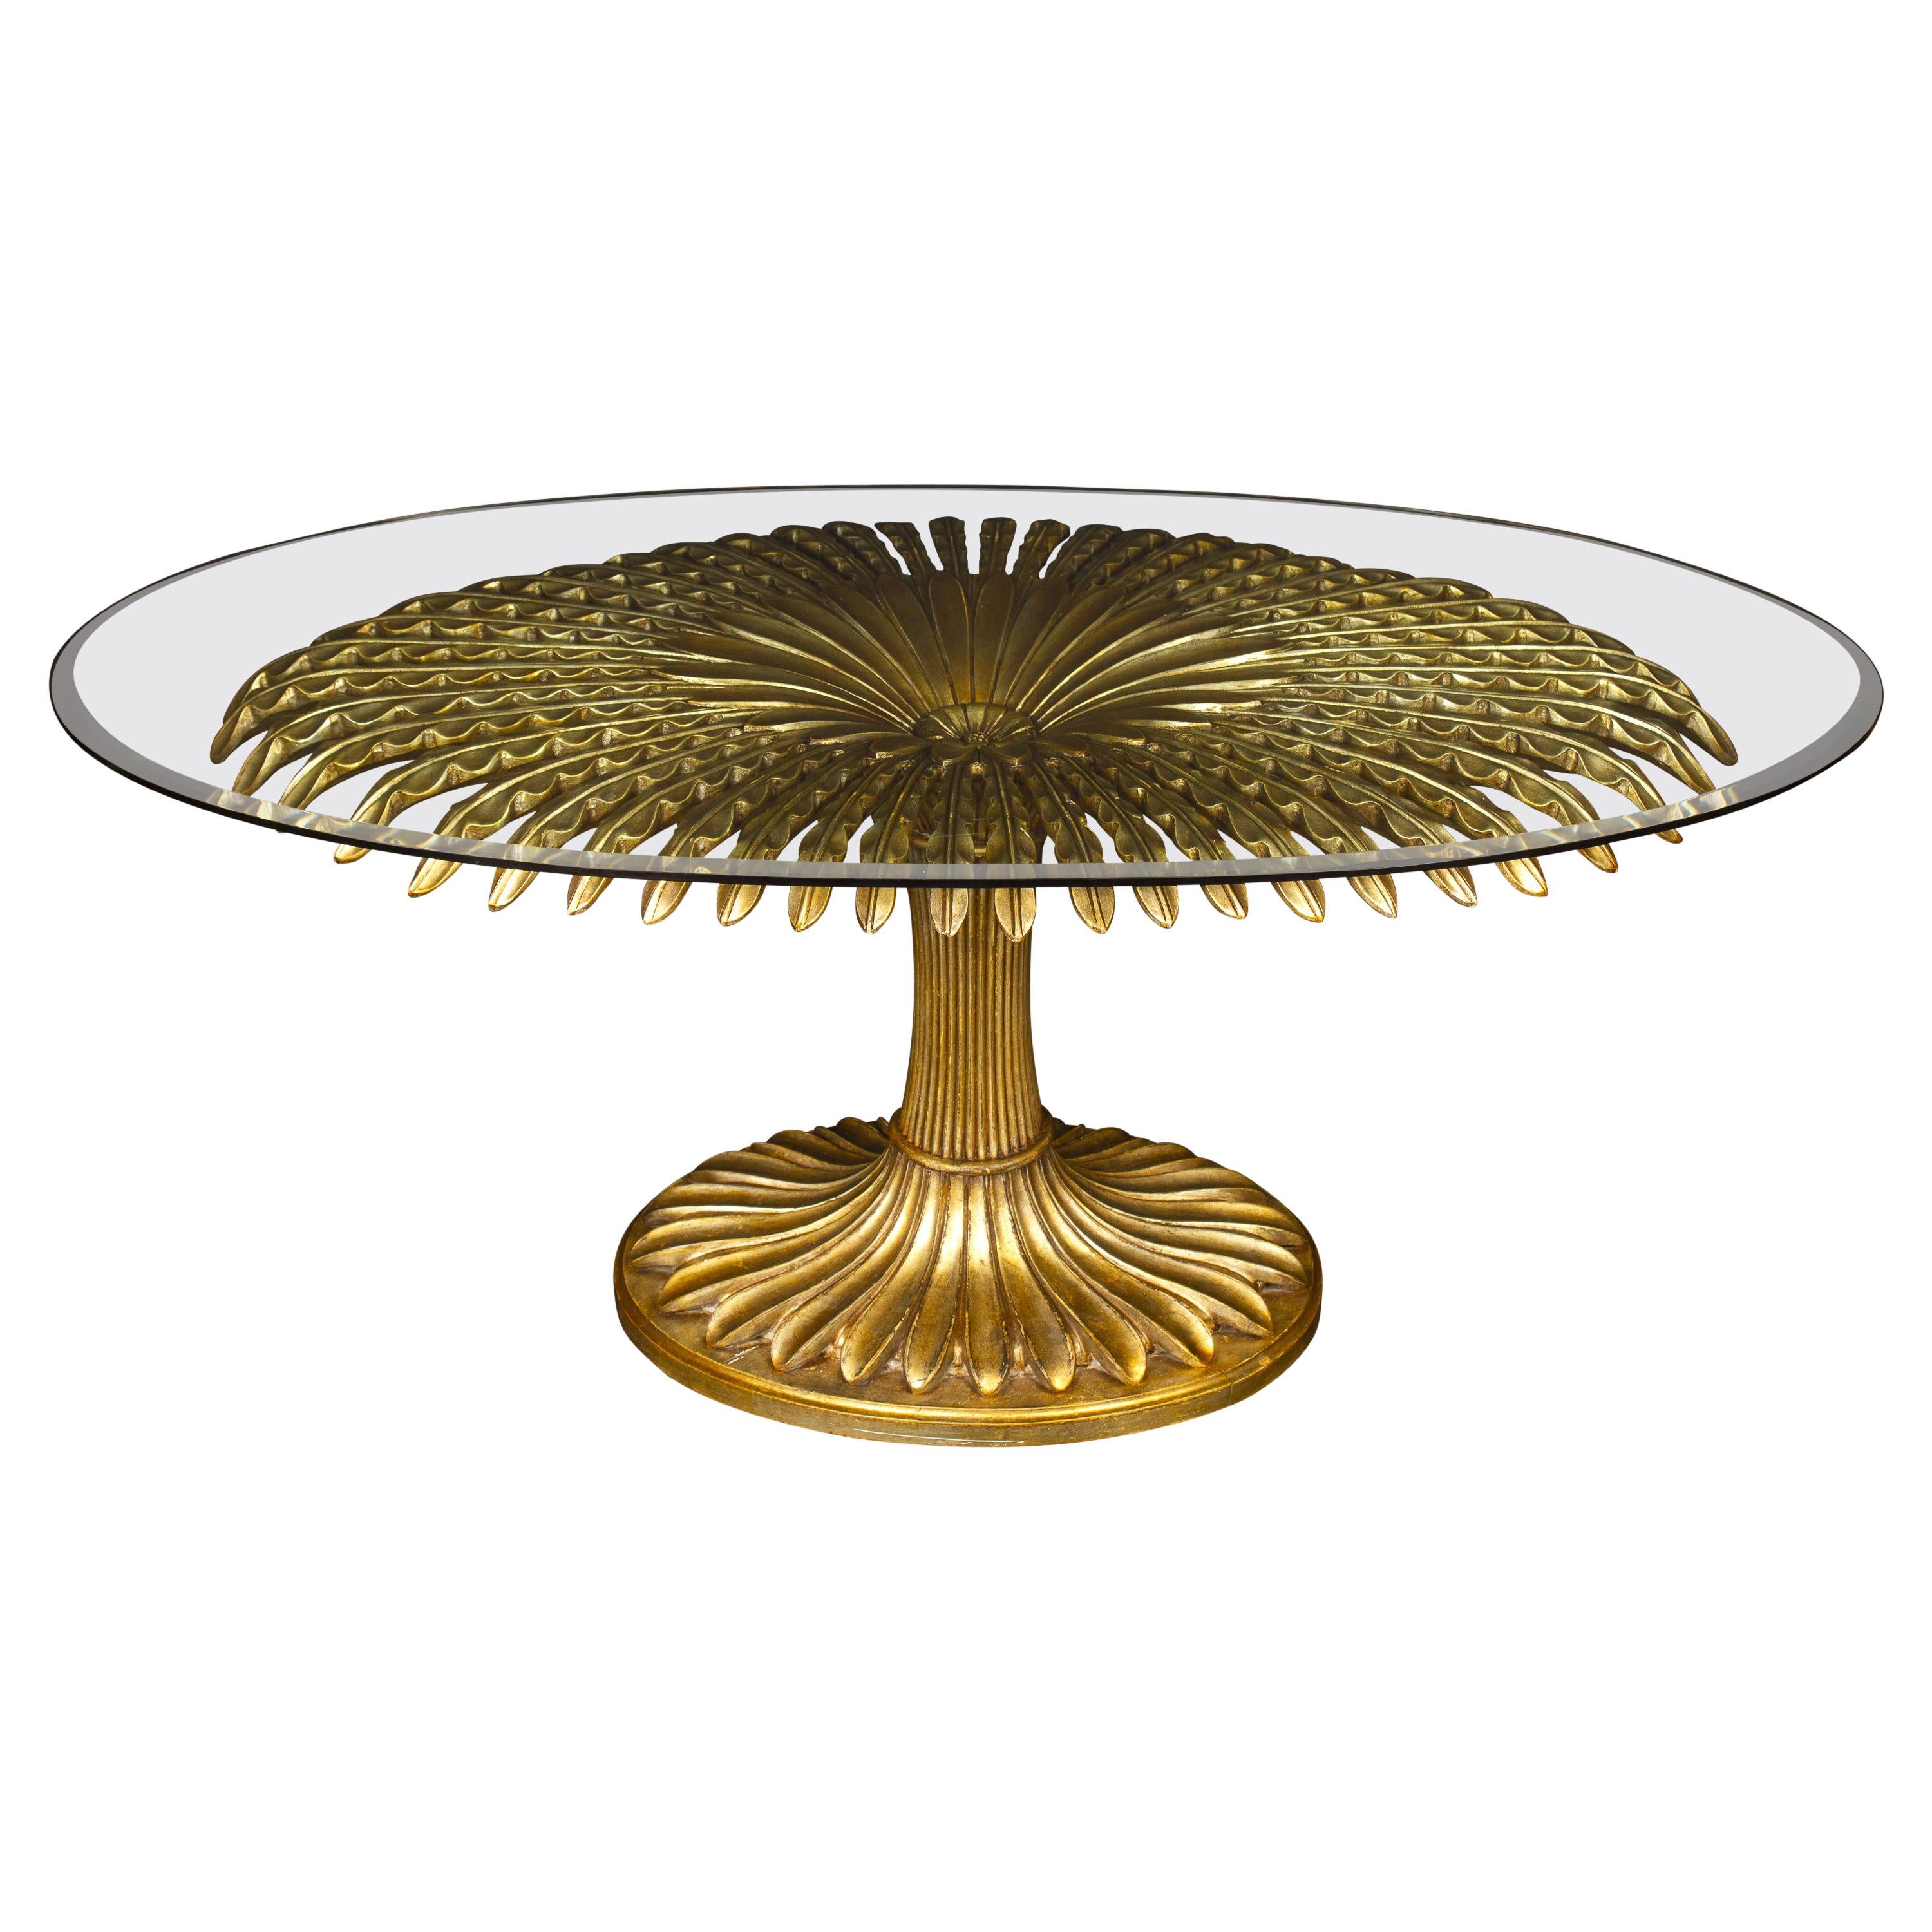 Striking Giltwood Palm Sculpture Dining or Center Table, Italy, 1970